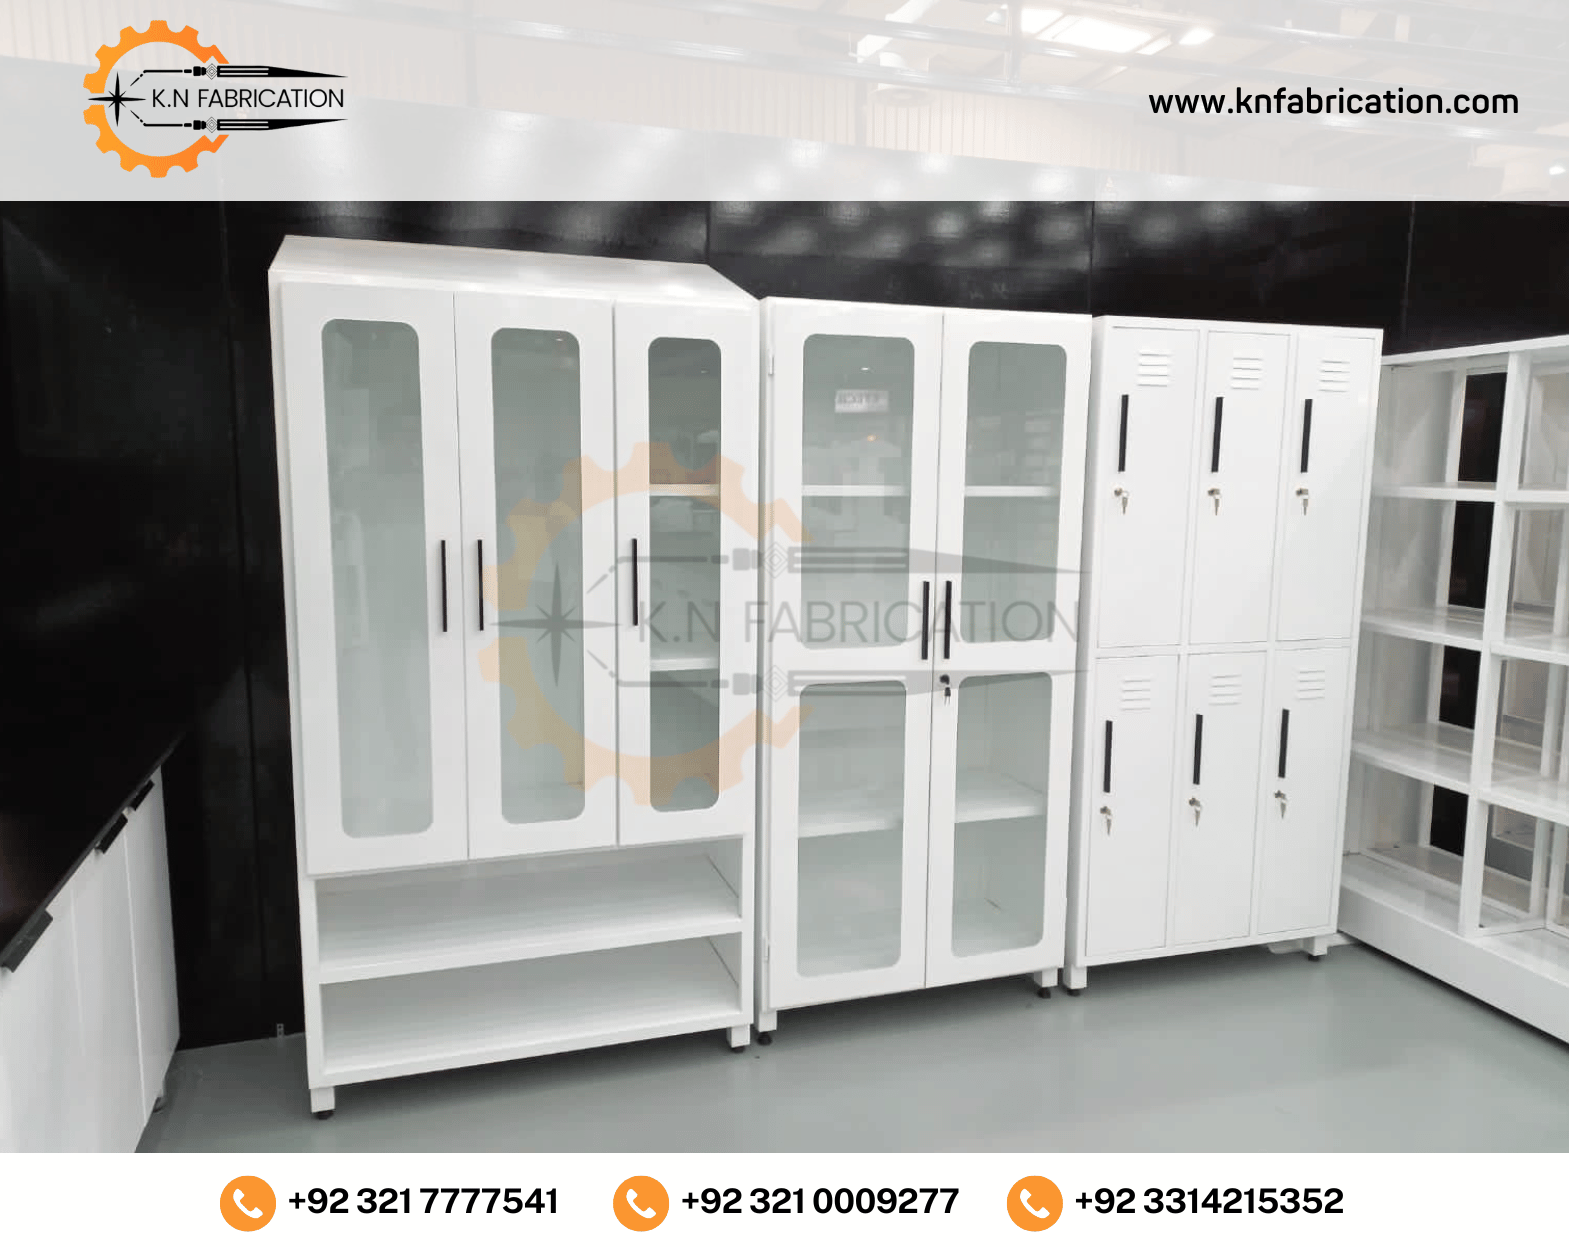 High-quality gowning cabinet in Pakistan by K.N Fabrication